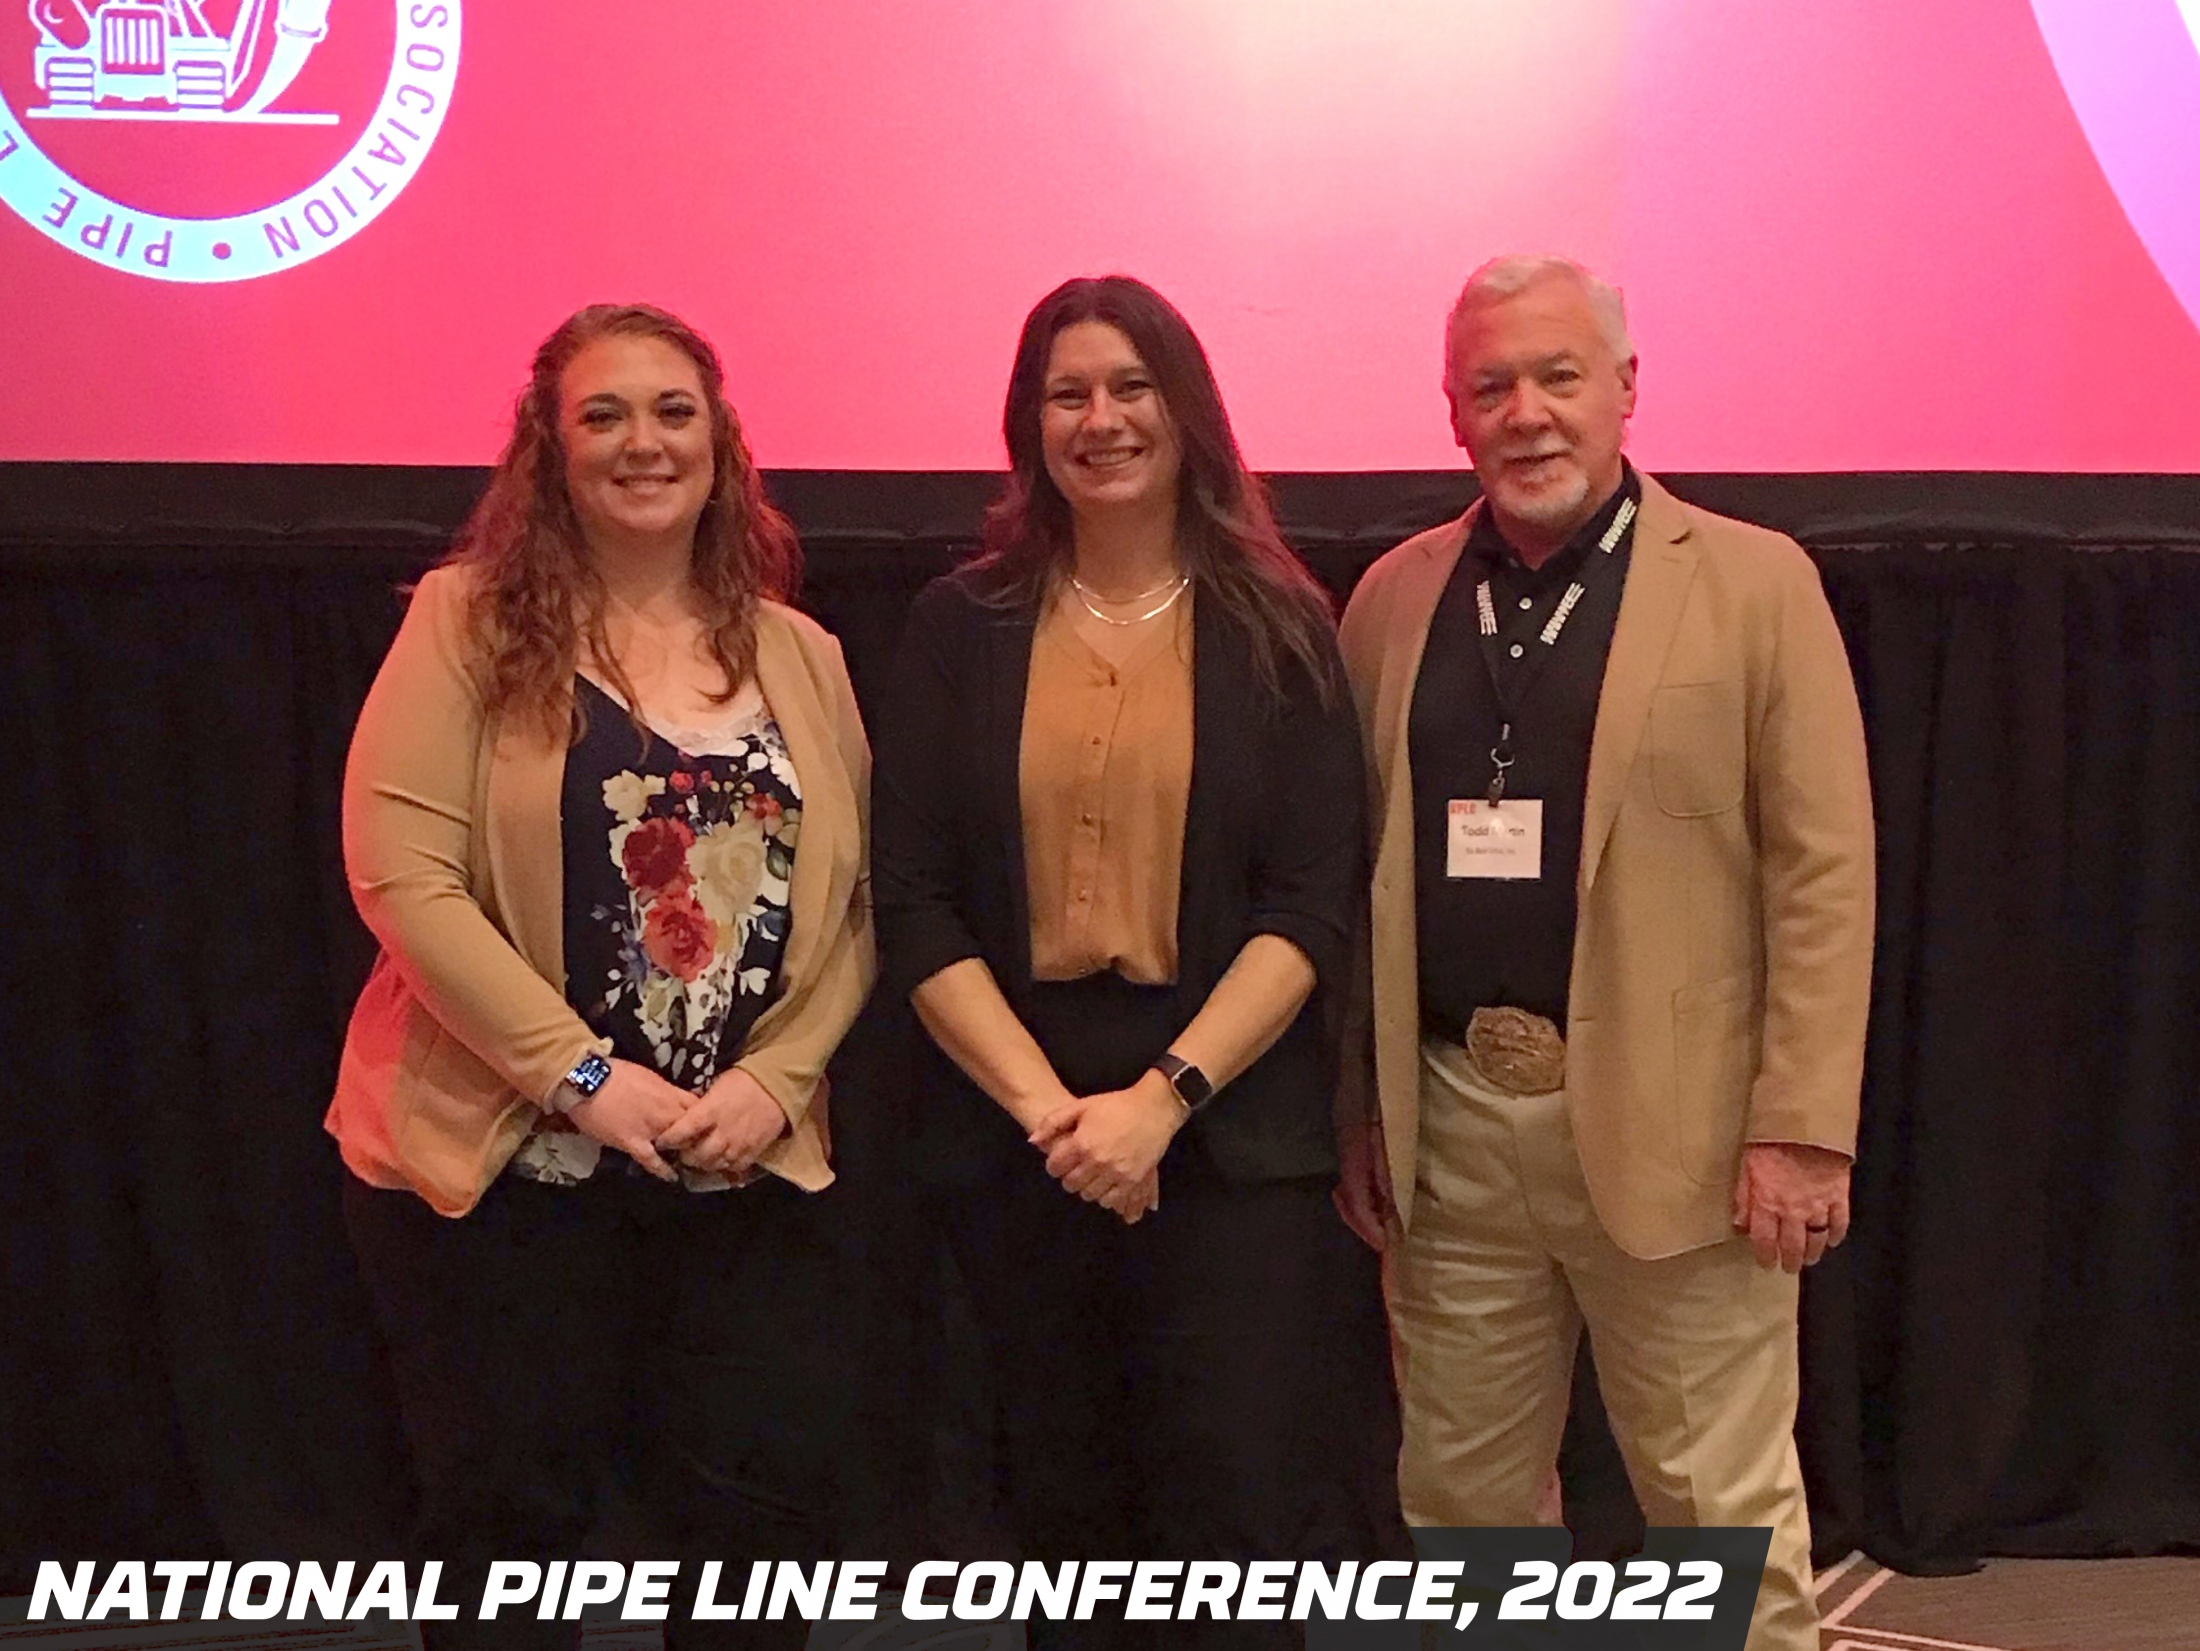 Presents at PLCA National Pipe Line Conference, 2022